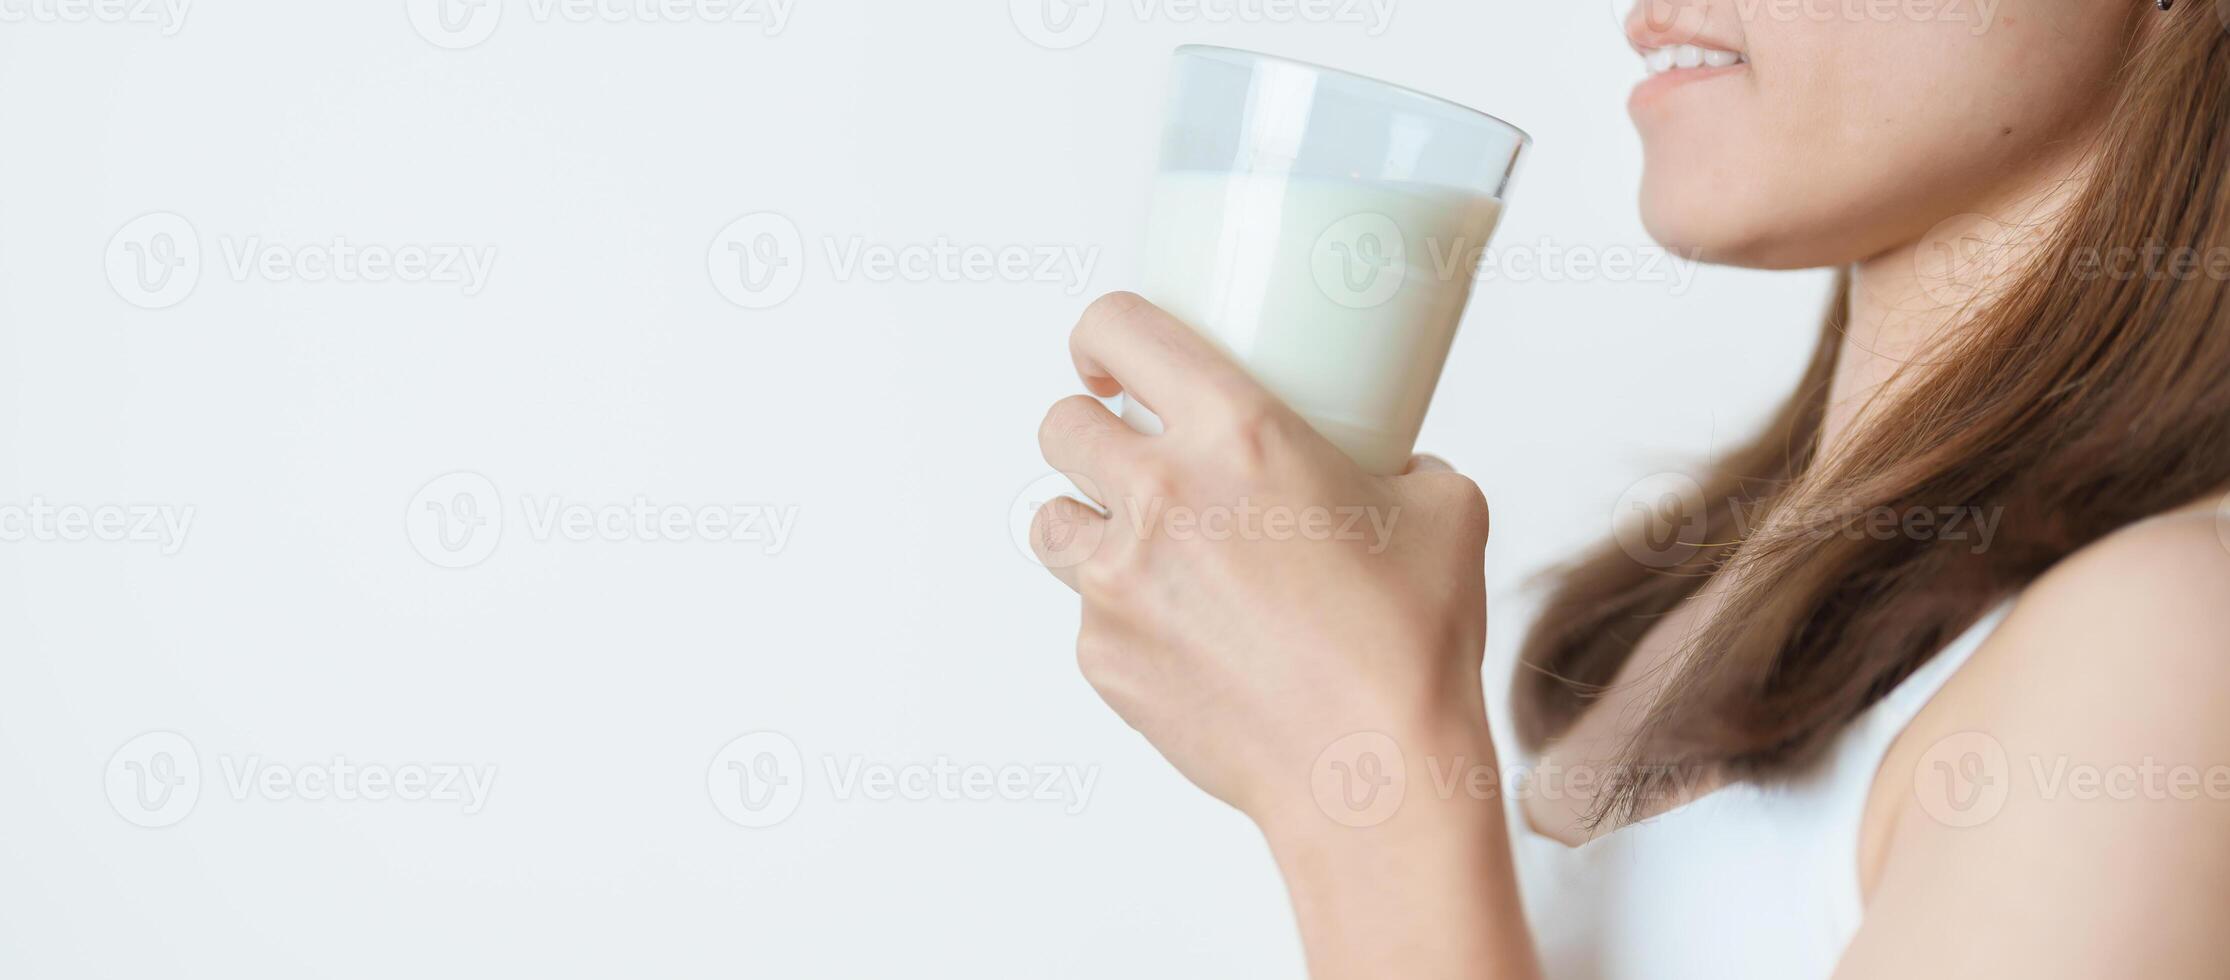 Milk drink and Daily Routine concept. Young woman Drinking milk with high calcium and nutrition at home, woman holding soy milk on glass with protein. Healthy, wellness and happy lifestyle photo